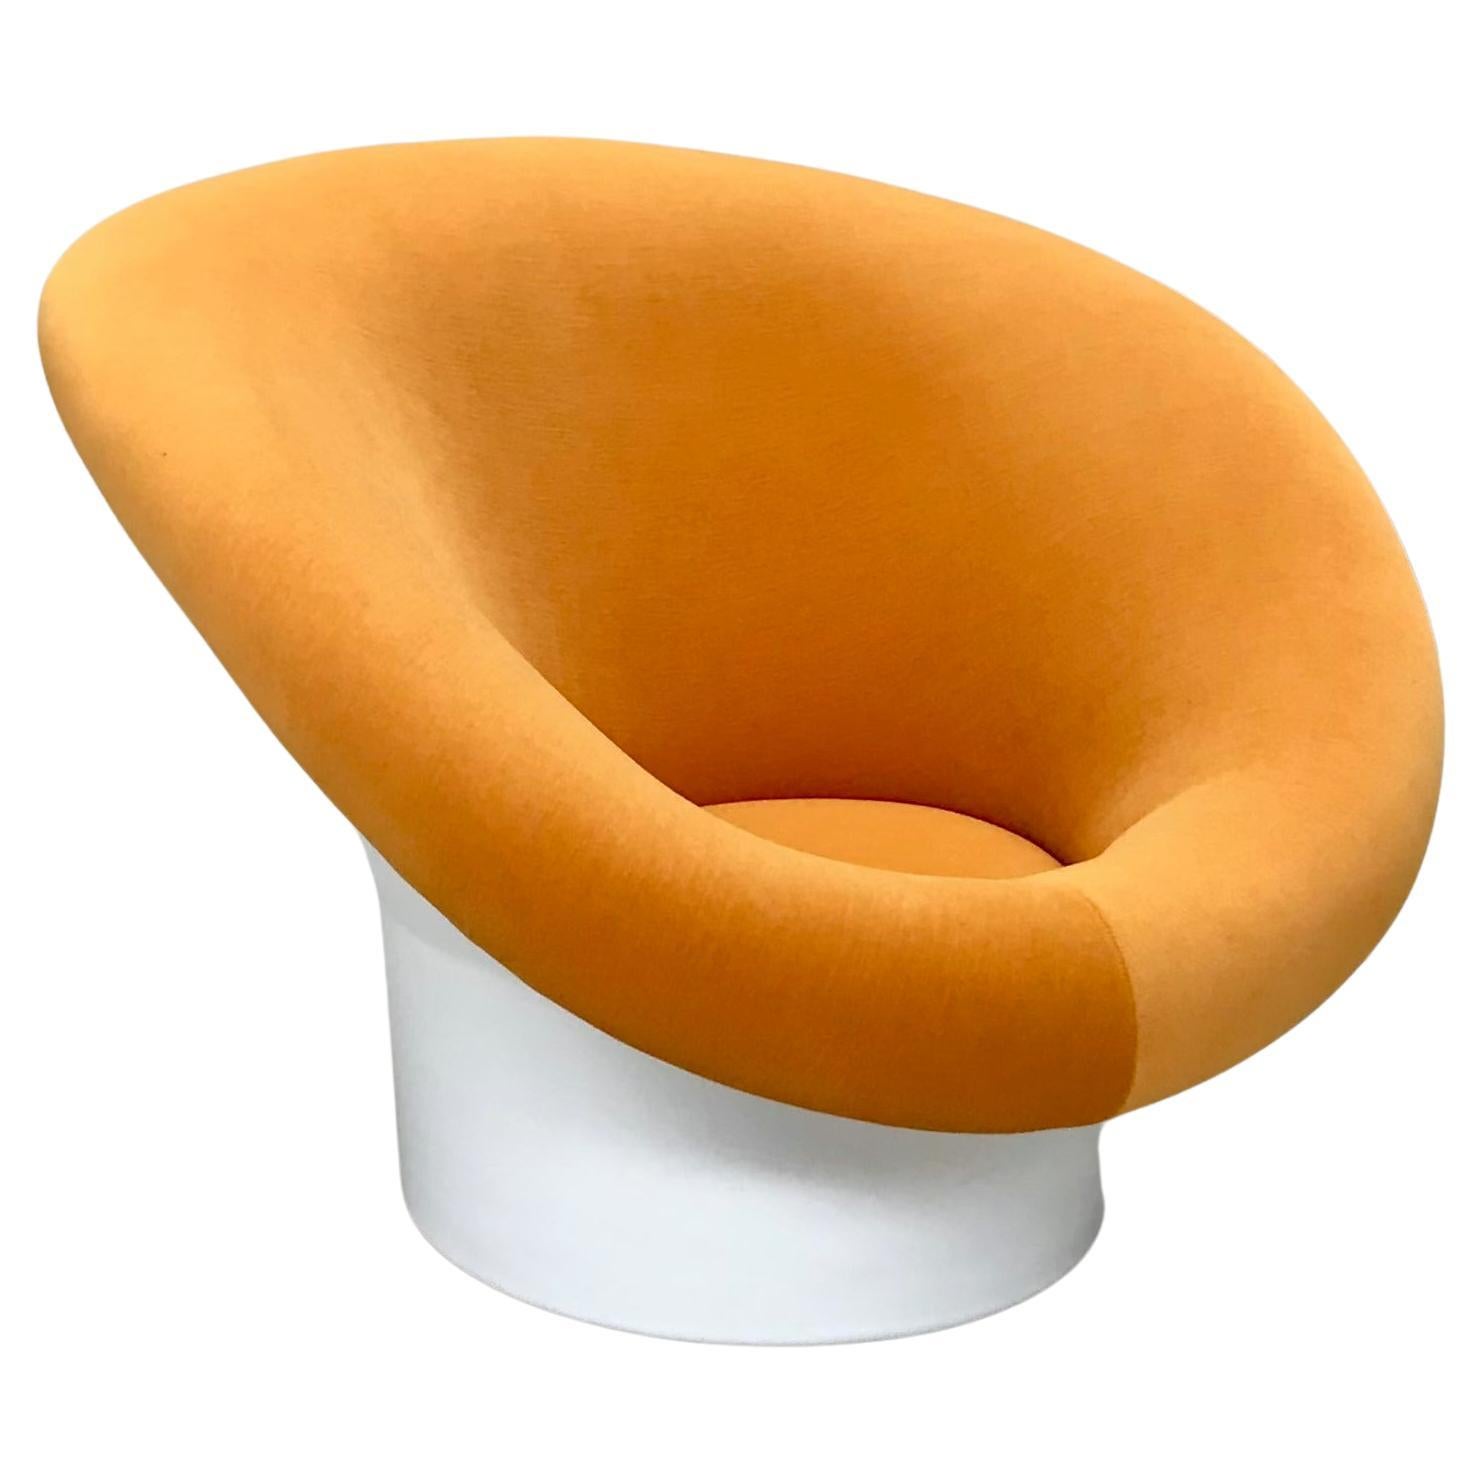 Beautiful Krokus armchair designed by Lennart Bender for Ulferts AB, Sweden, in the 1960s.
Super confortable and adorable with its famous mushroom shape.
Entirely restored and reupholstered in a Kvadrat velvet fabric.
Dimensions : H58, D88cm